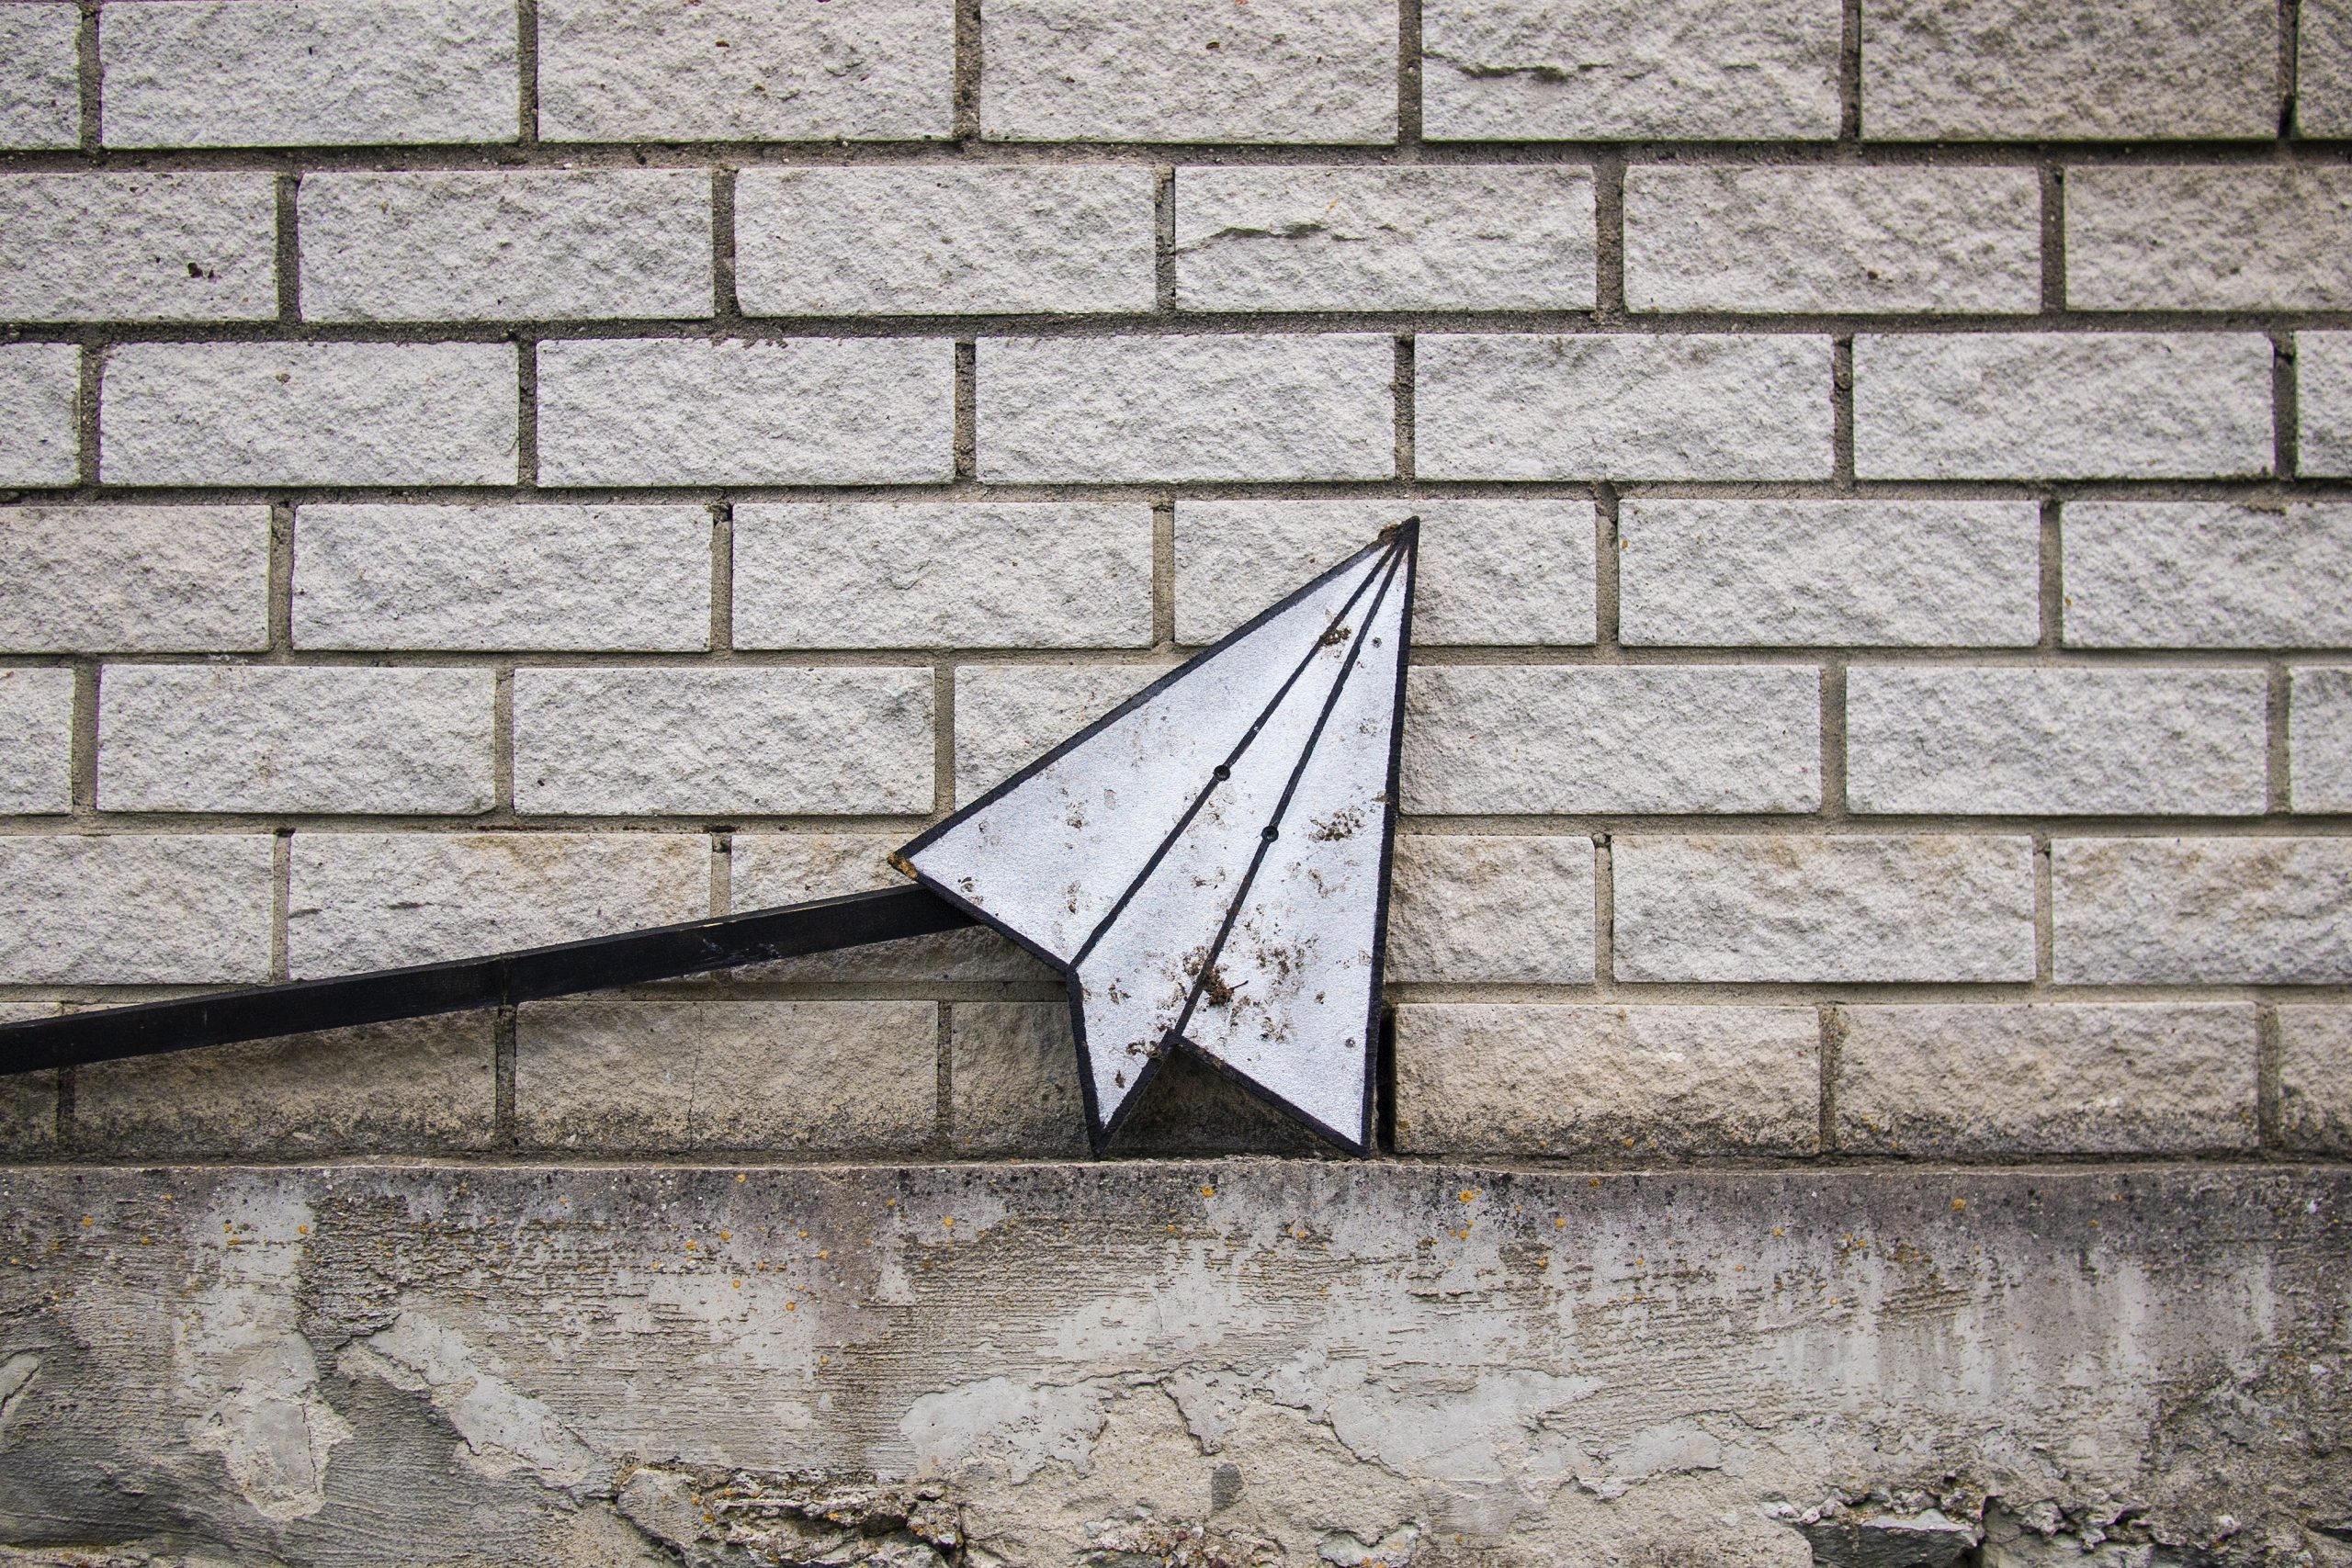 Paper airplane icon against a brick wall